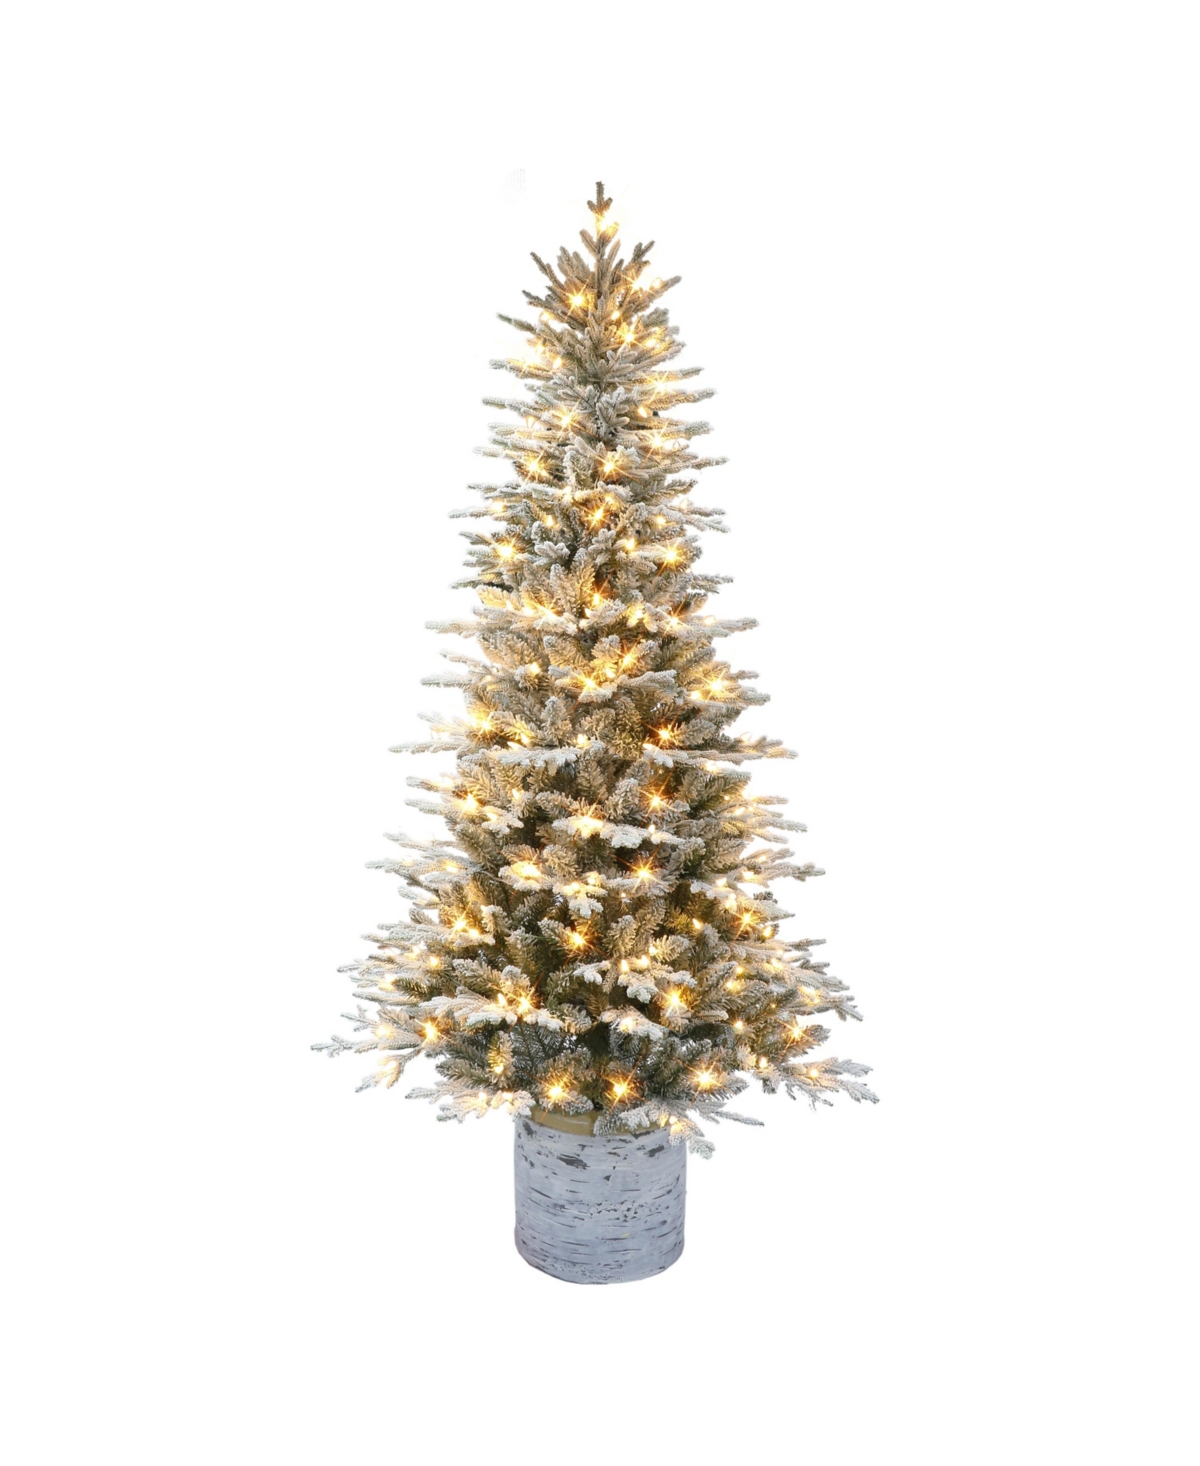 Puleo 6' Pre-lit Flocked Arctic Fir Tree With Warm White Lights & Birch Wood Look Base In Green